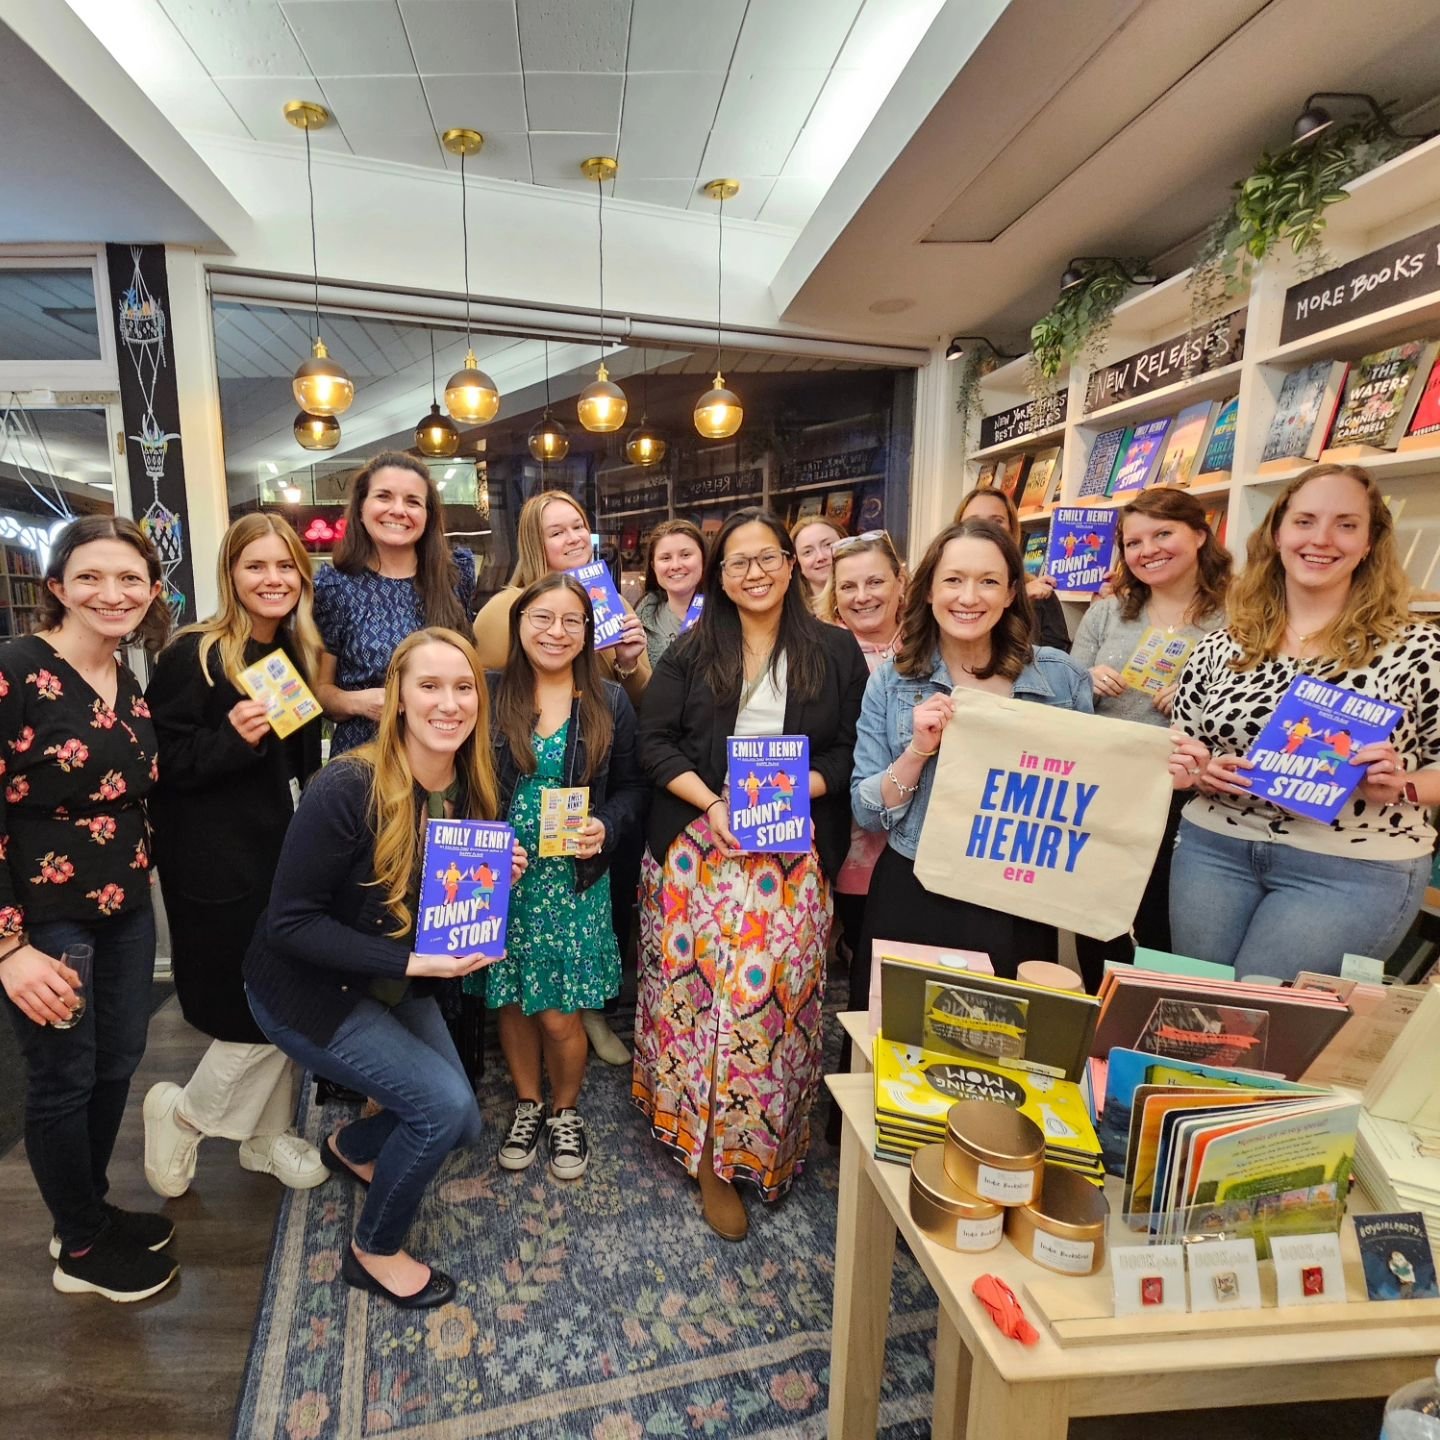 Thank you @collectivebookstore for inviting us to a @emilyhenrywrites #funnystory book release party! Can't wait to read this for our next book club. 

Our relationship with The Collective Bookstore goes back to when they kindly helped us purchase bo